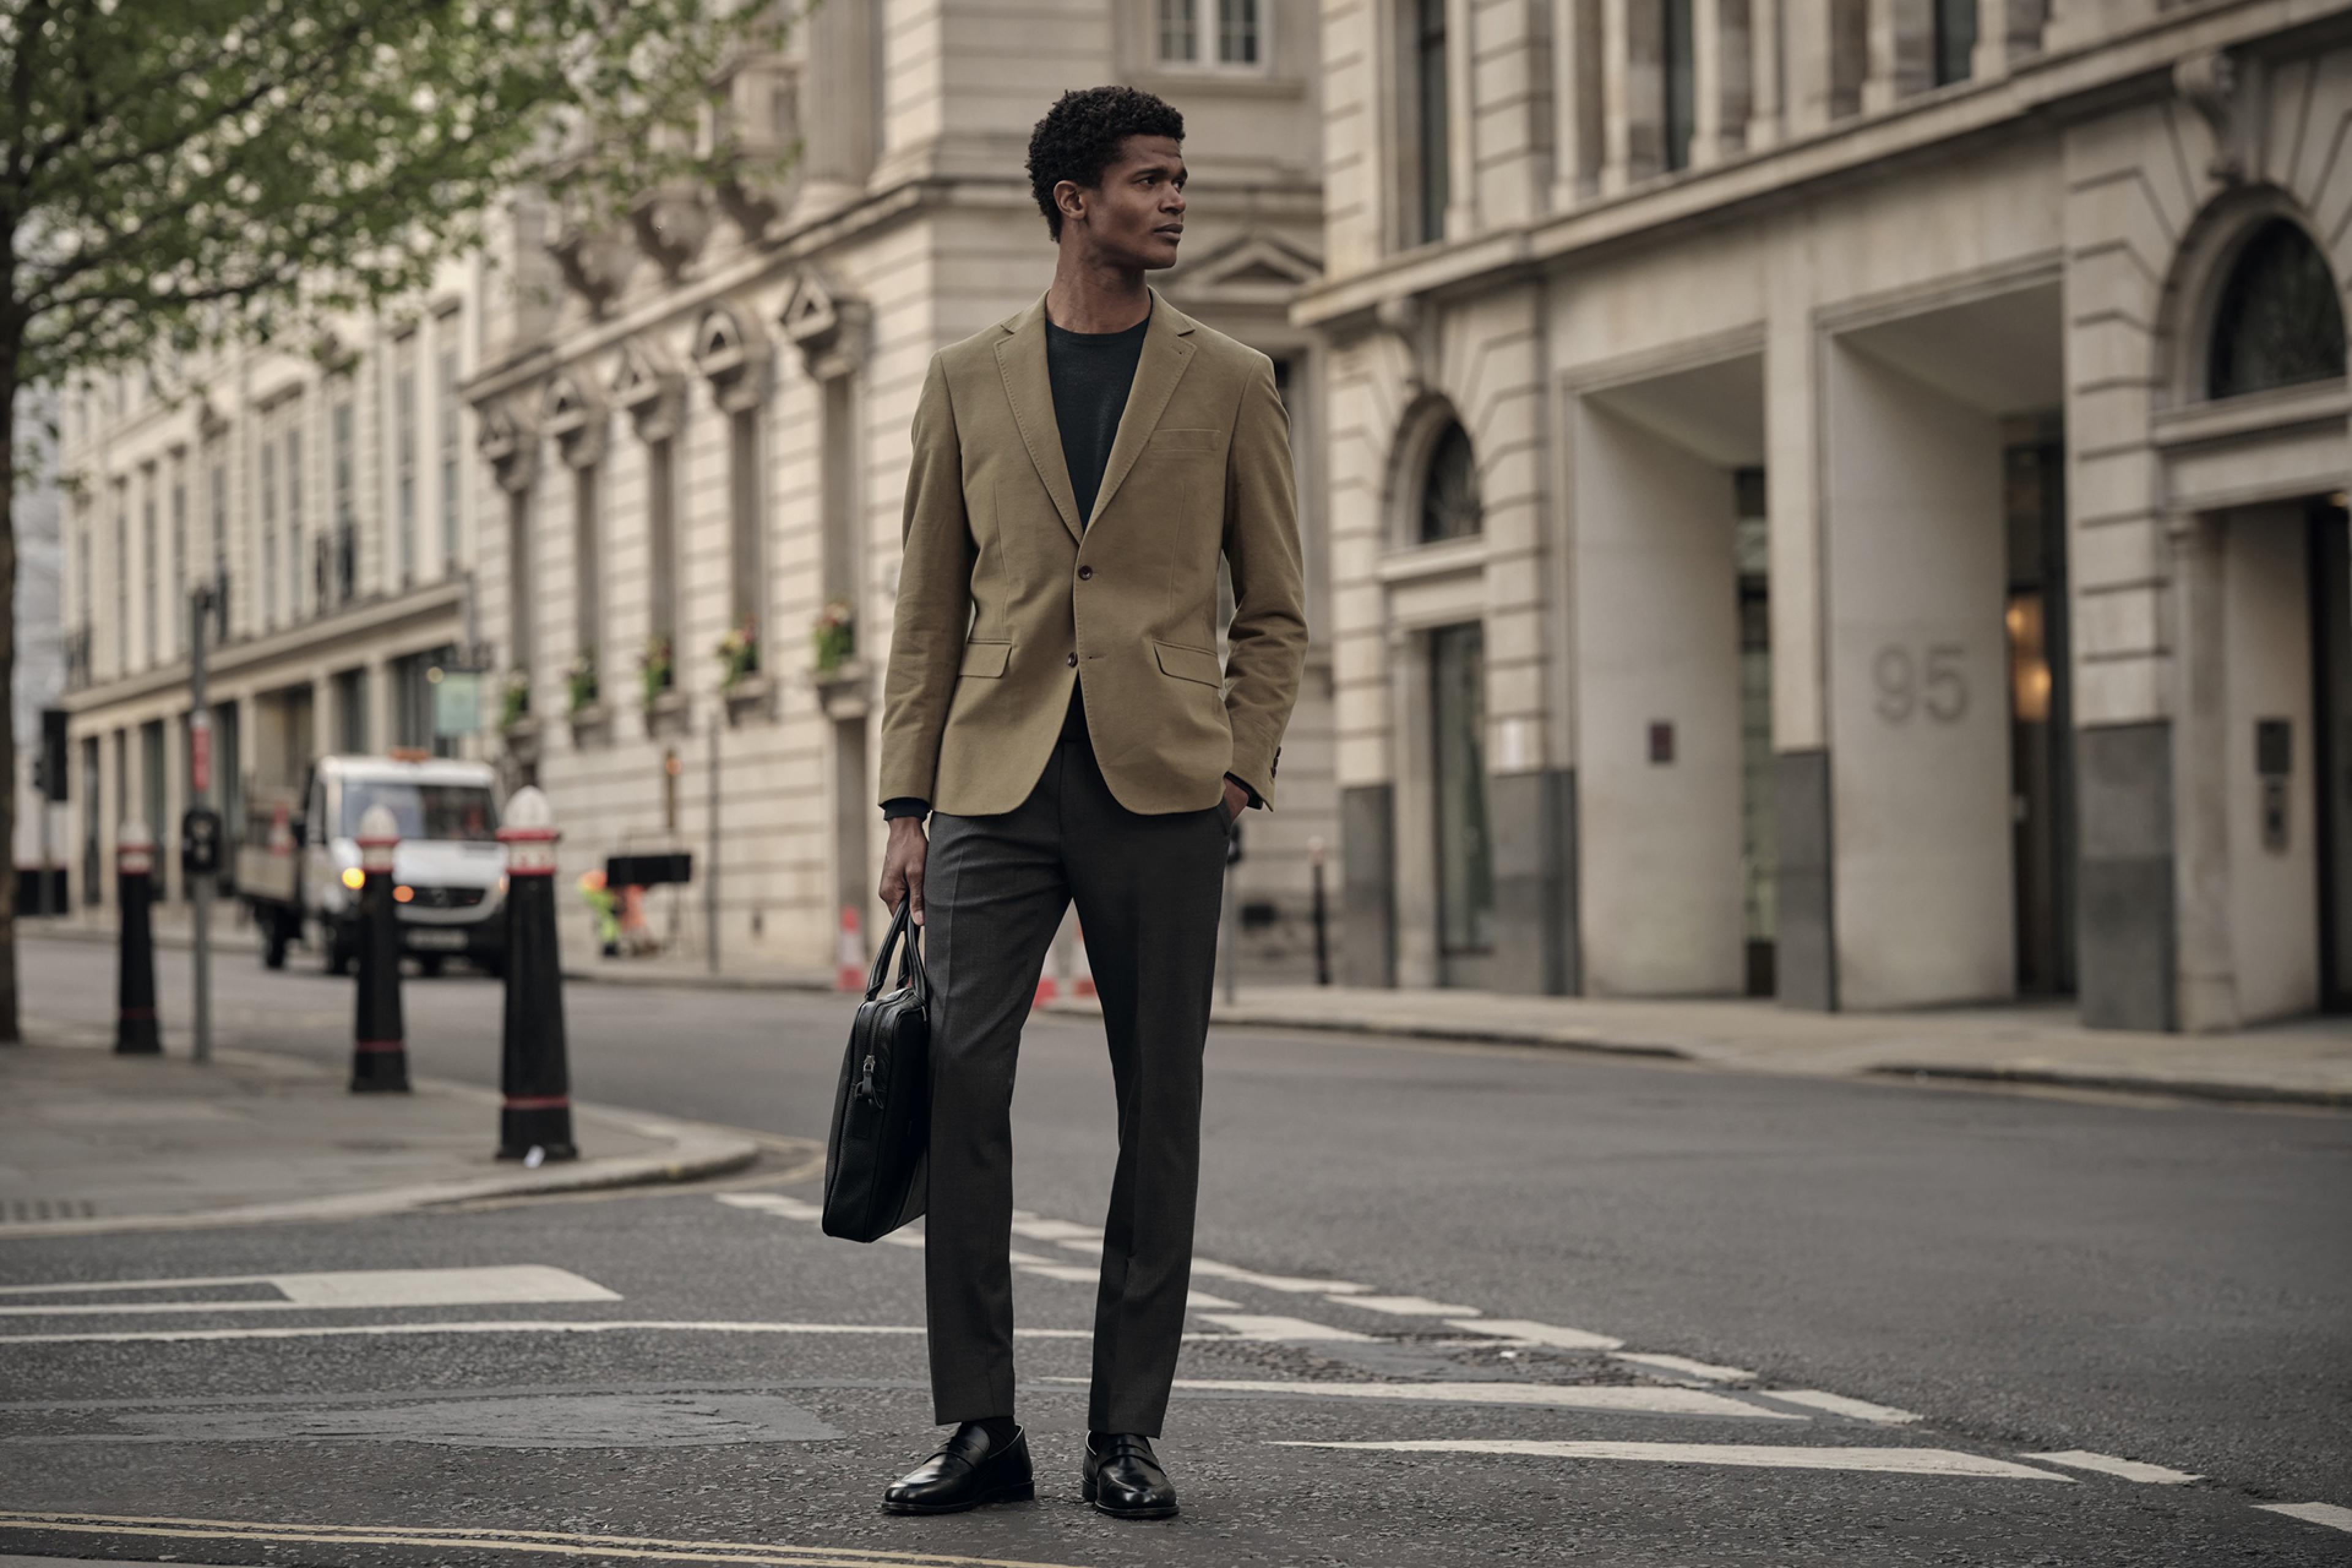 Win £500 to spend at Charles Tyrwhitt | Competition | Square Mile